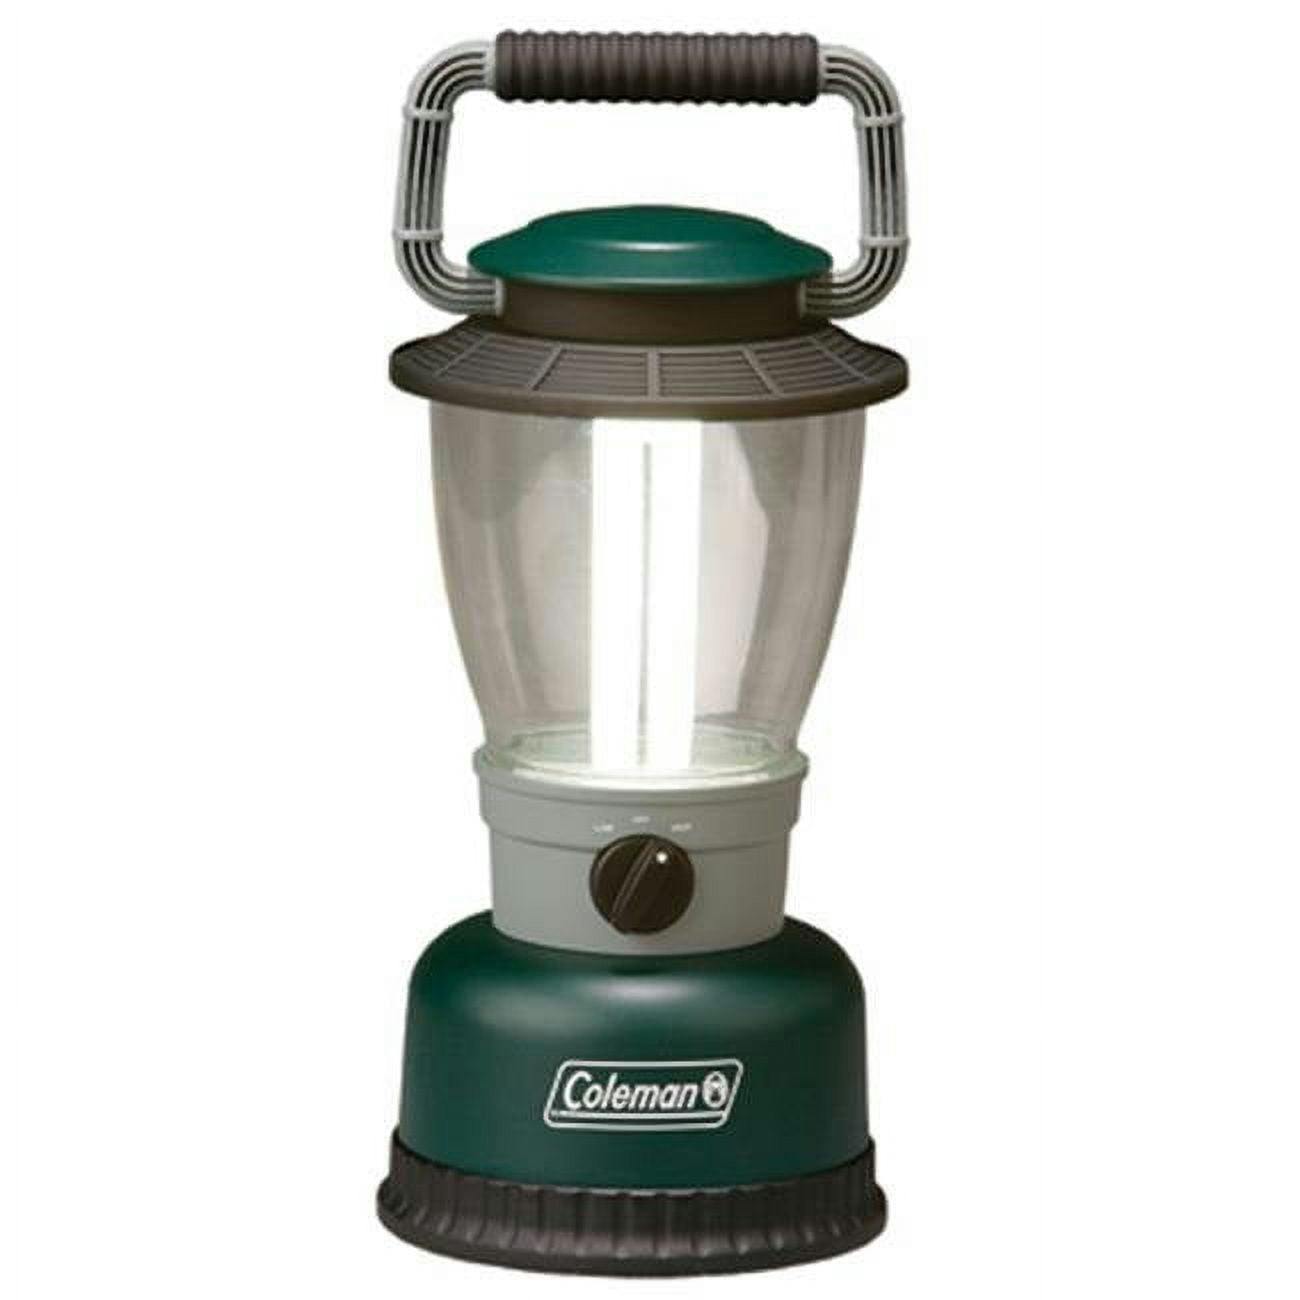 Rugged Outdoor 350 Lumens Battery-Powered LED Camping Lantern